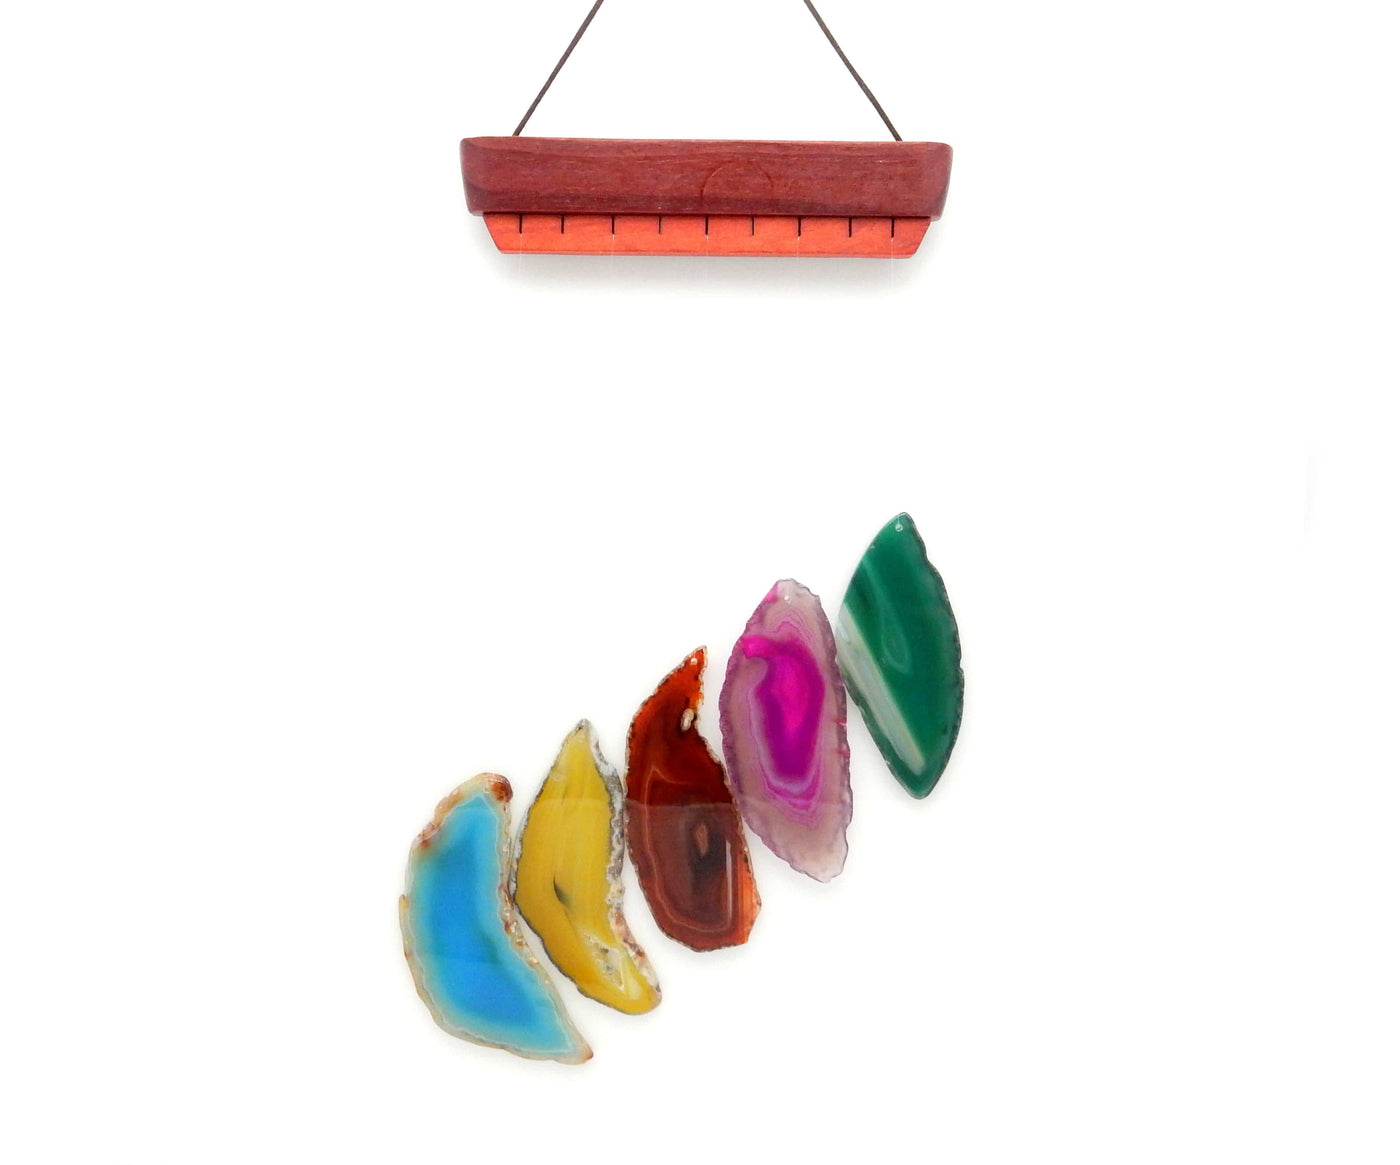 wind chime with wooden top and colorful agate slices